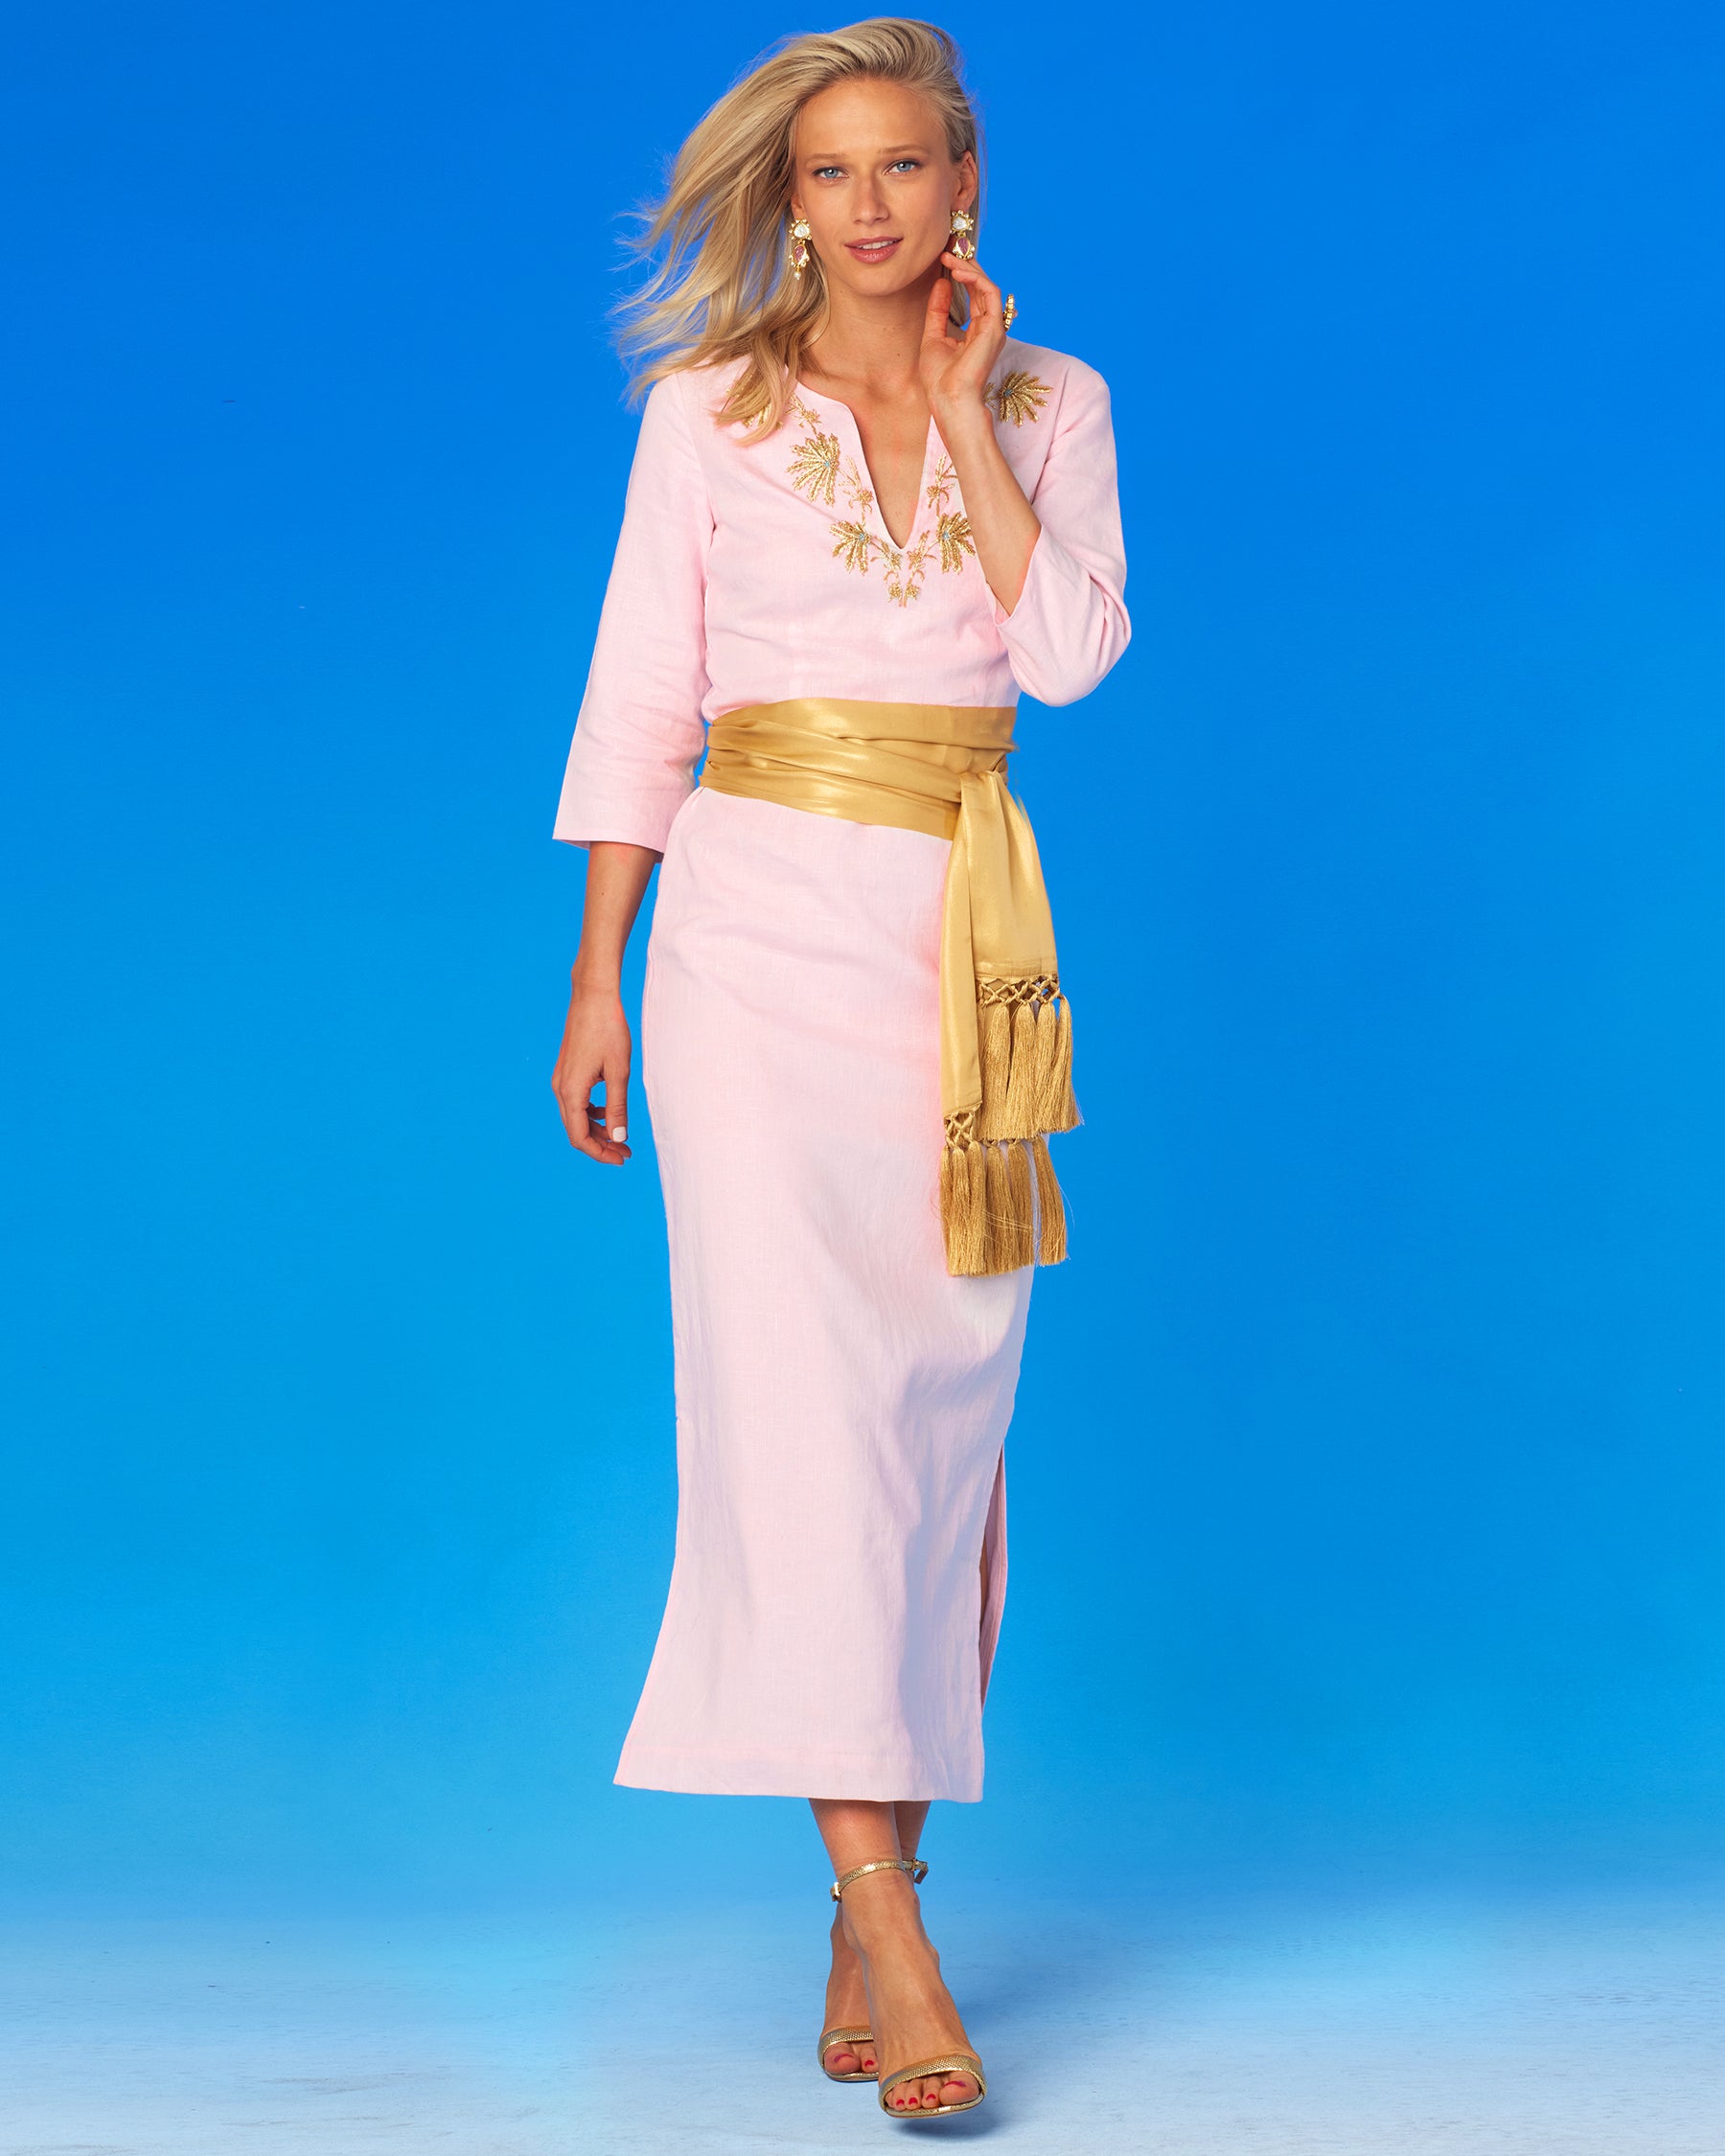 Cosima Sash Belt in Pale Gold Shimmer-worn with a long pink linen tunic dress